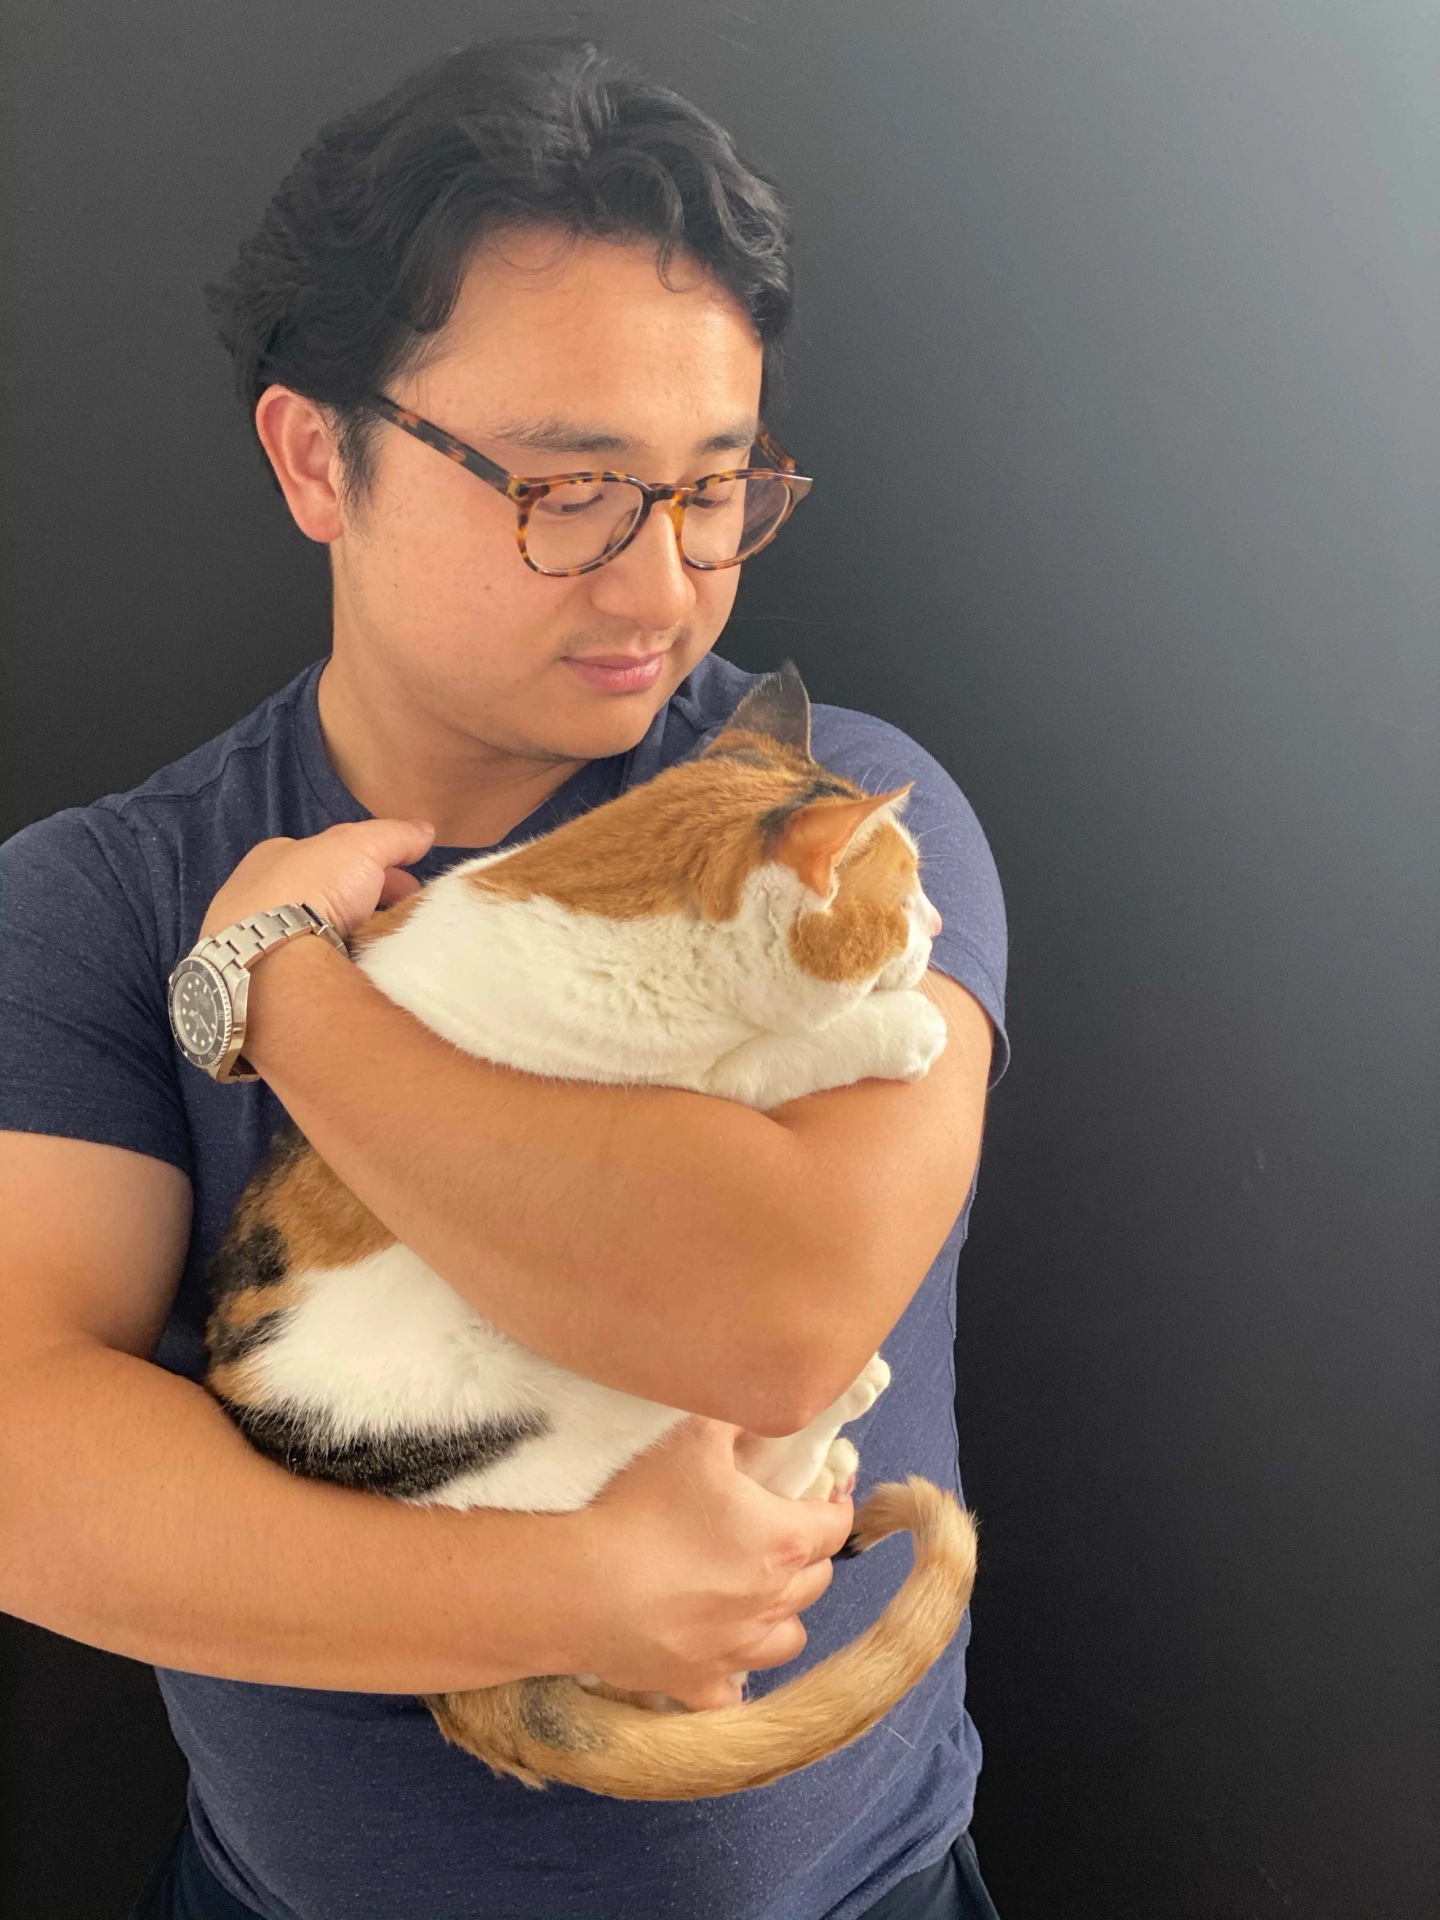 Cat Person co-founder Lambert gently gazes at a foster cat that he is holding in his arms